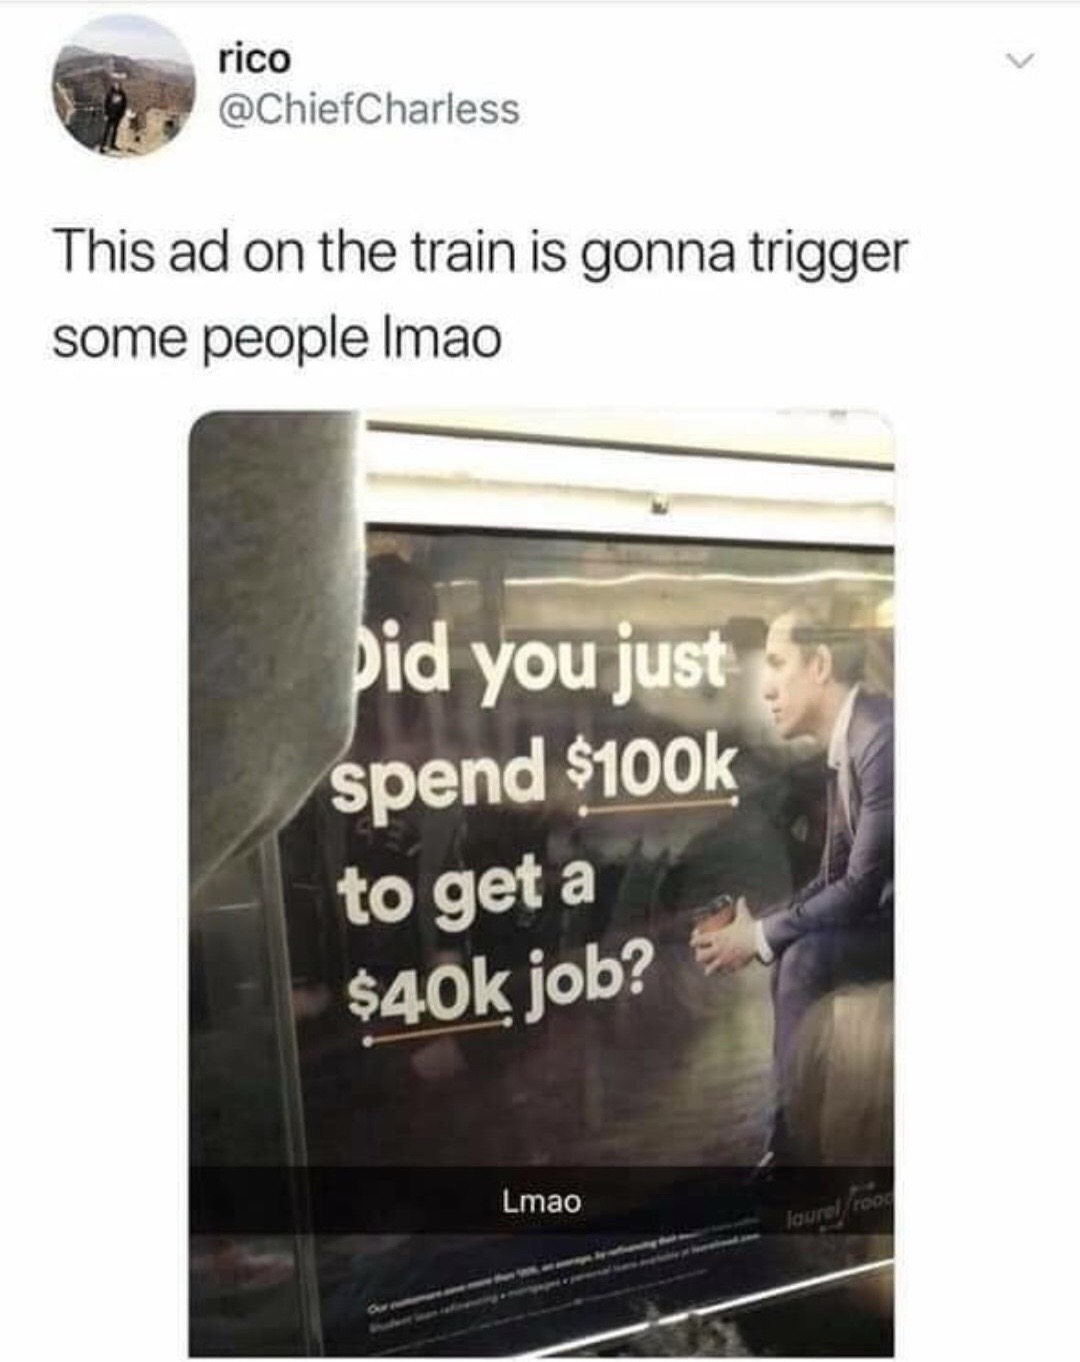 did you spend 100k for a 40k job - rico This ad on the train is gonna trigger some people Imao Did you just spend $ to get a $40k job? Lmao lourel, rong